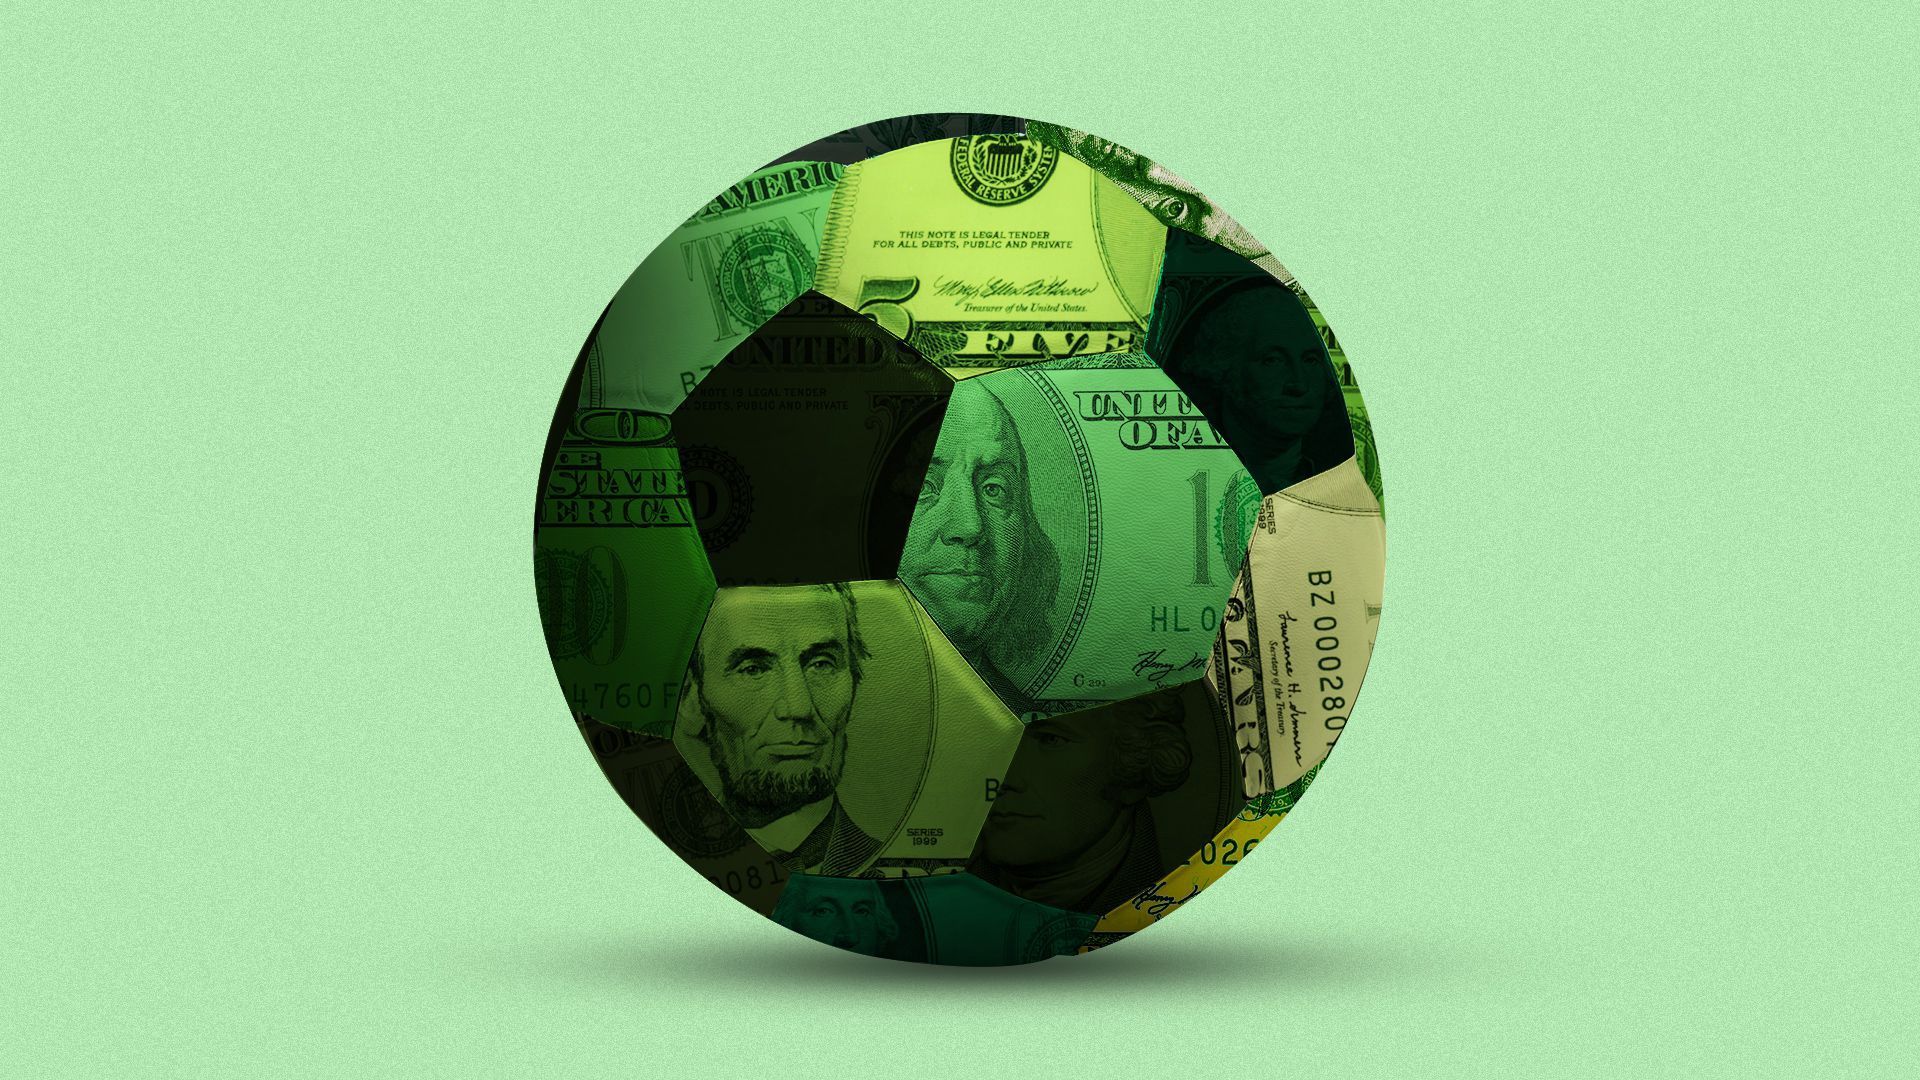 An illustration of a soccer ball made in part of out of money